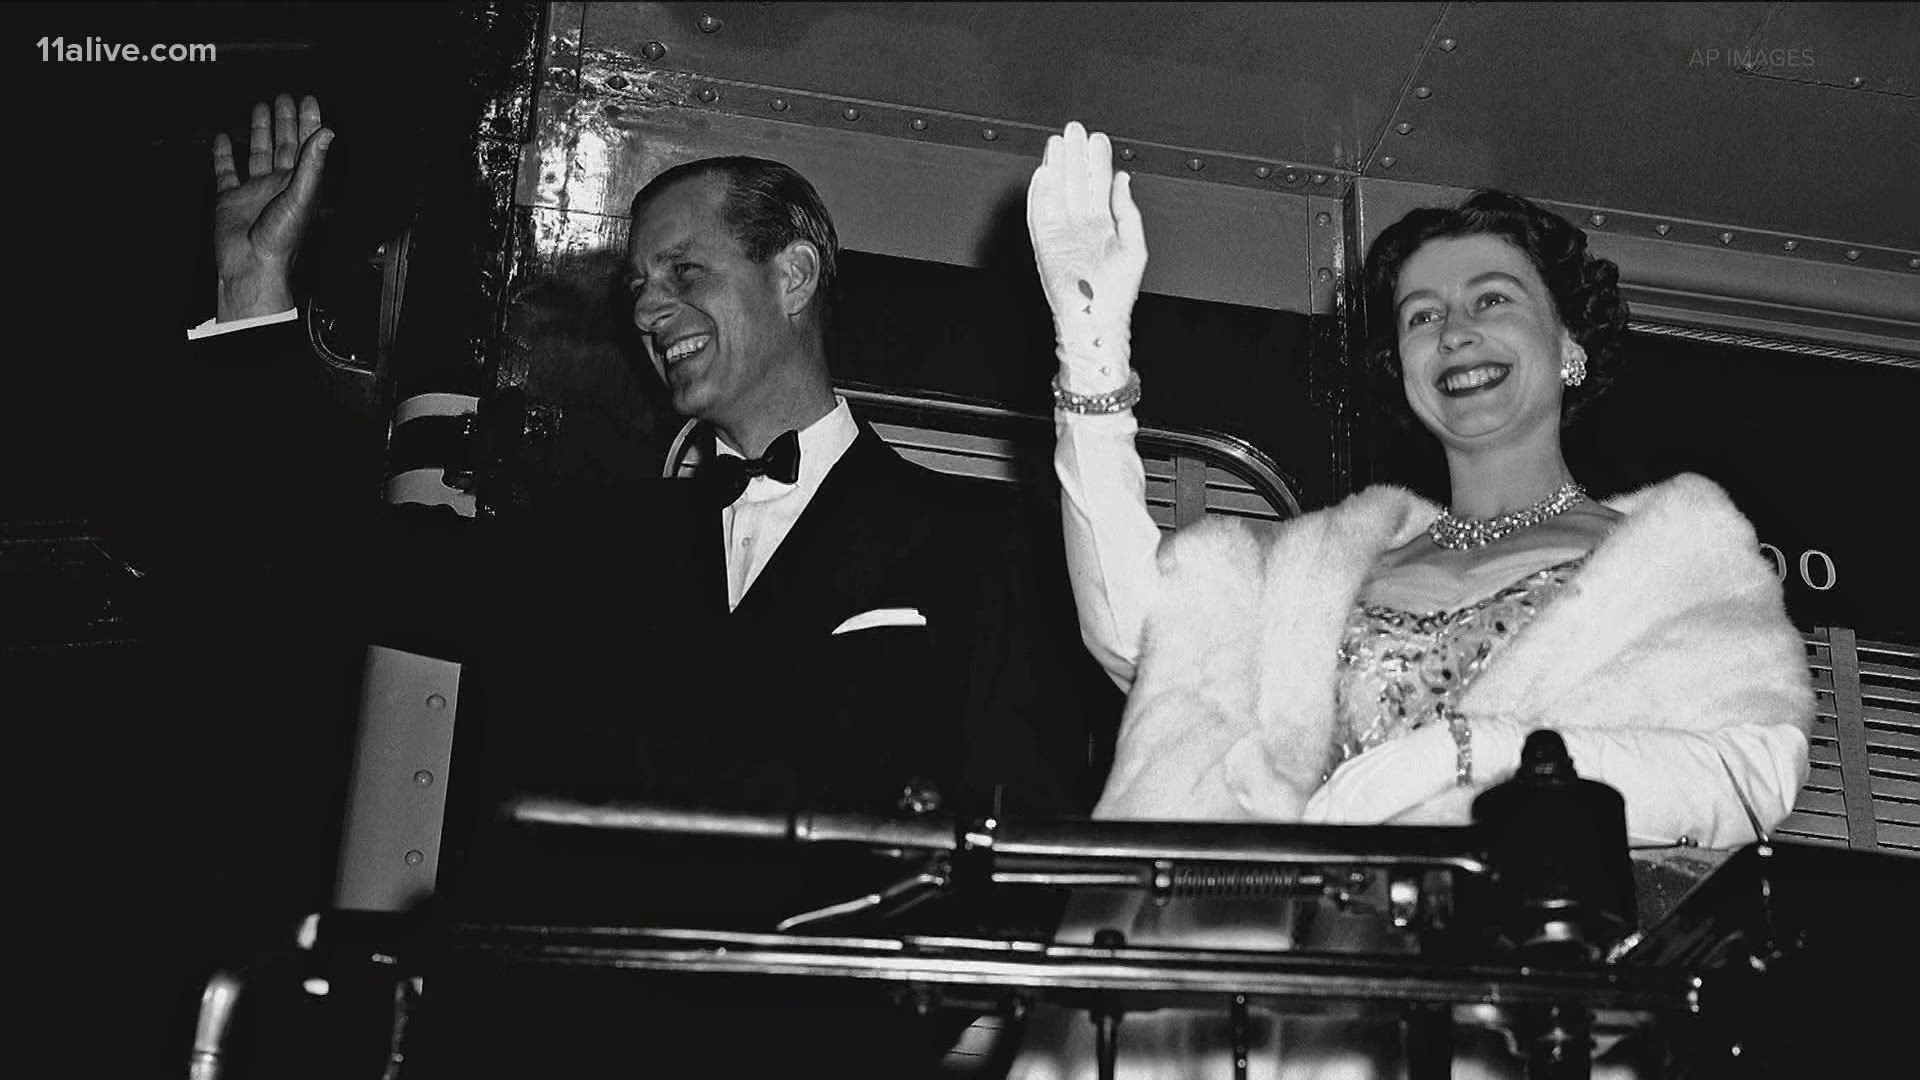 The Duke of Edinburgh and husband to Queen Elizabeth for more than 7 decades died at home this morning. Here’s a look back at his life.